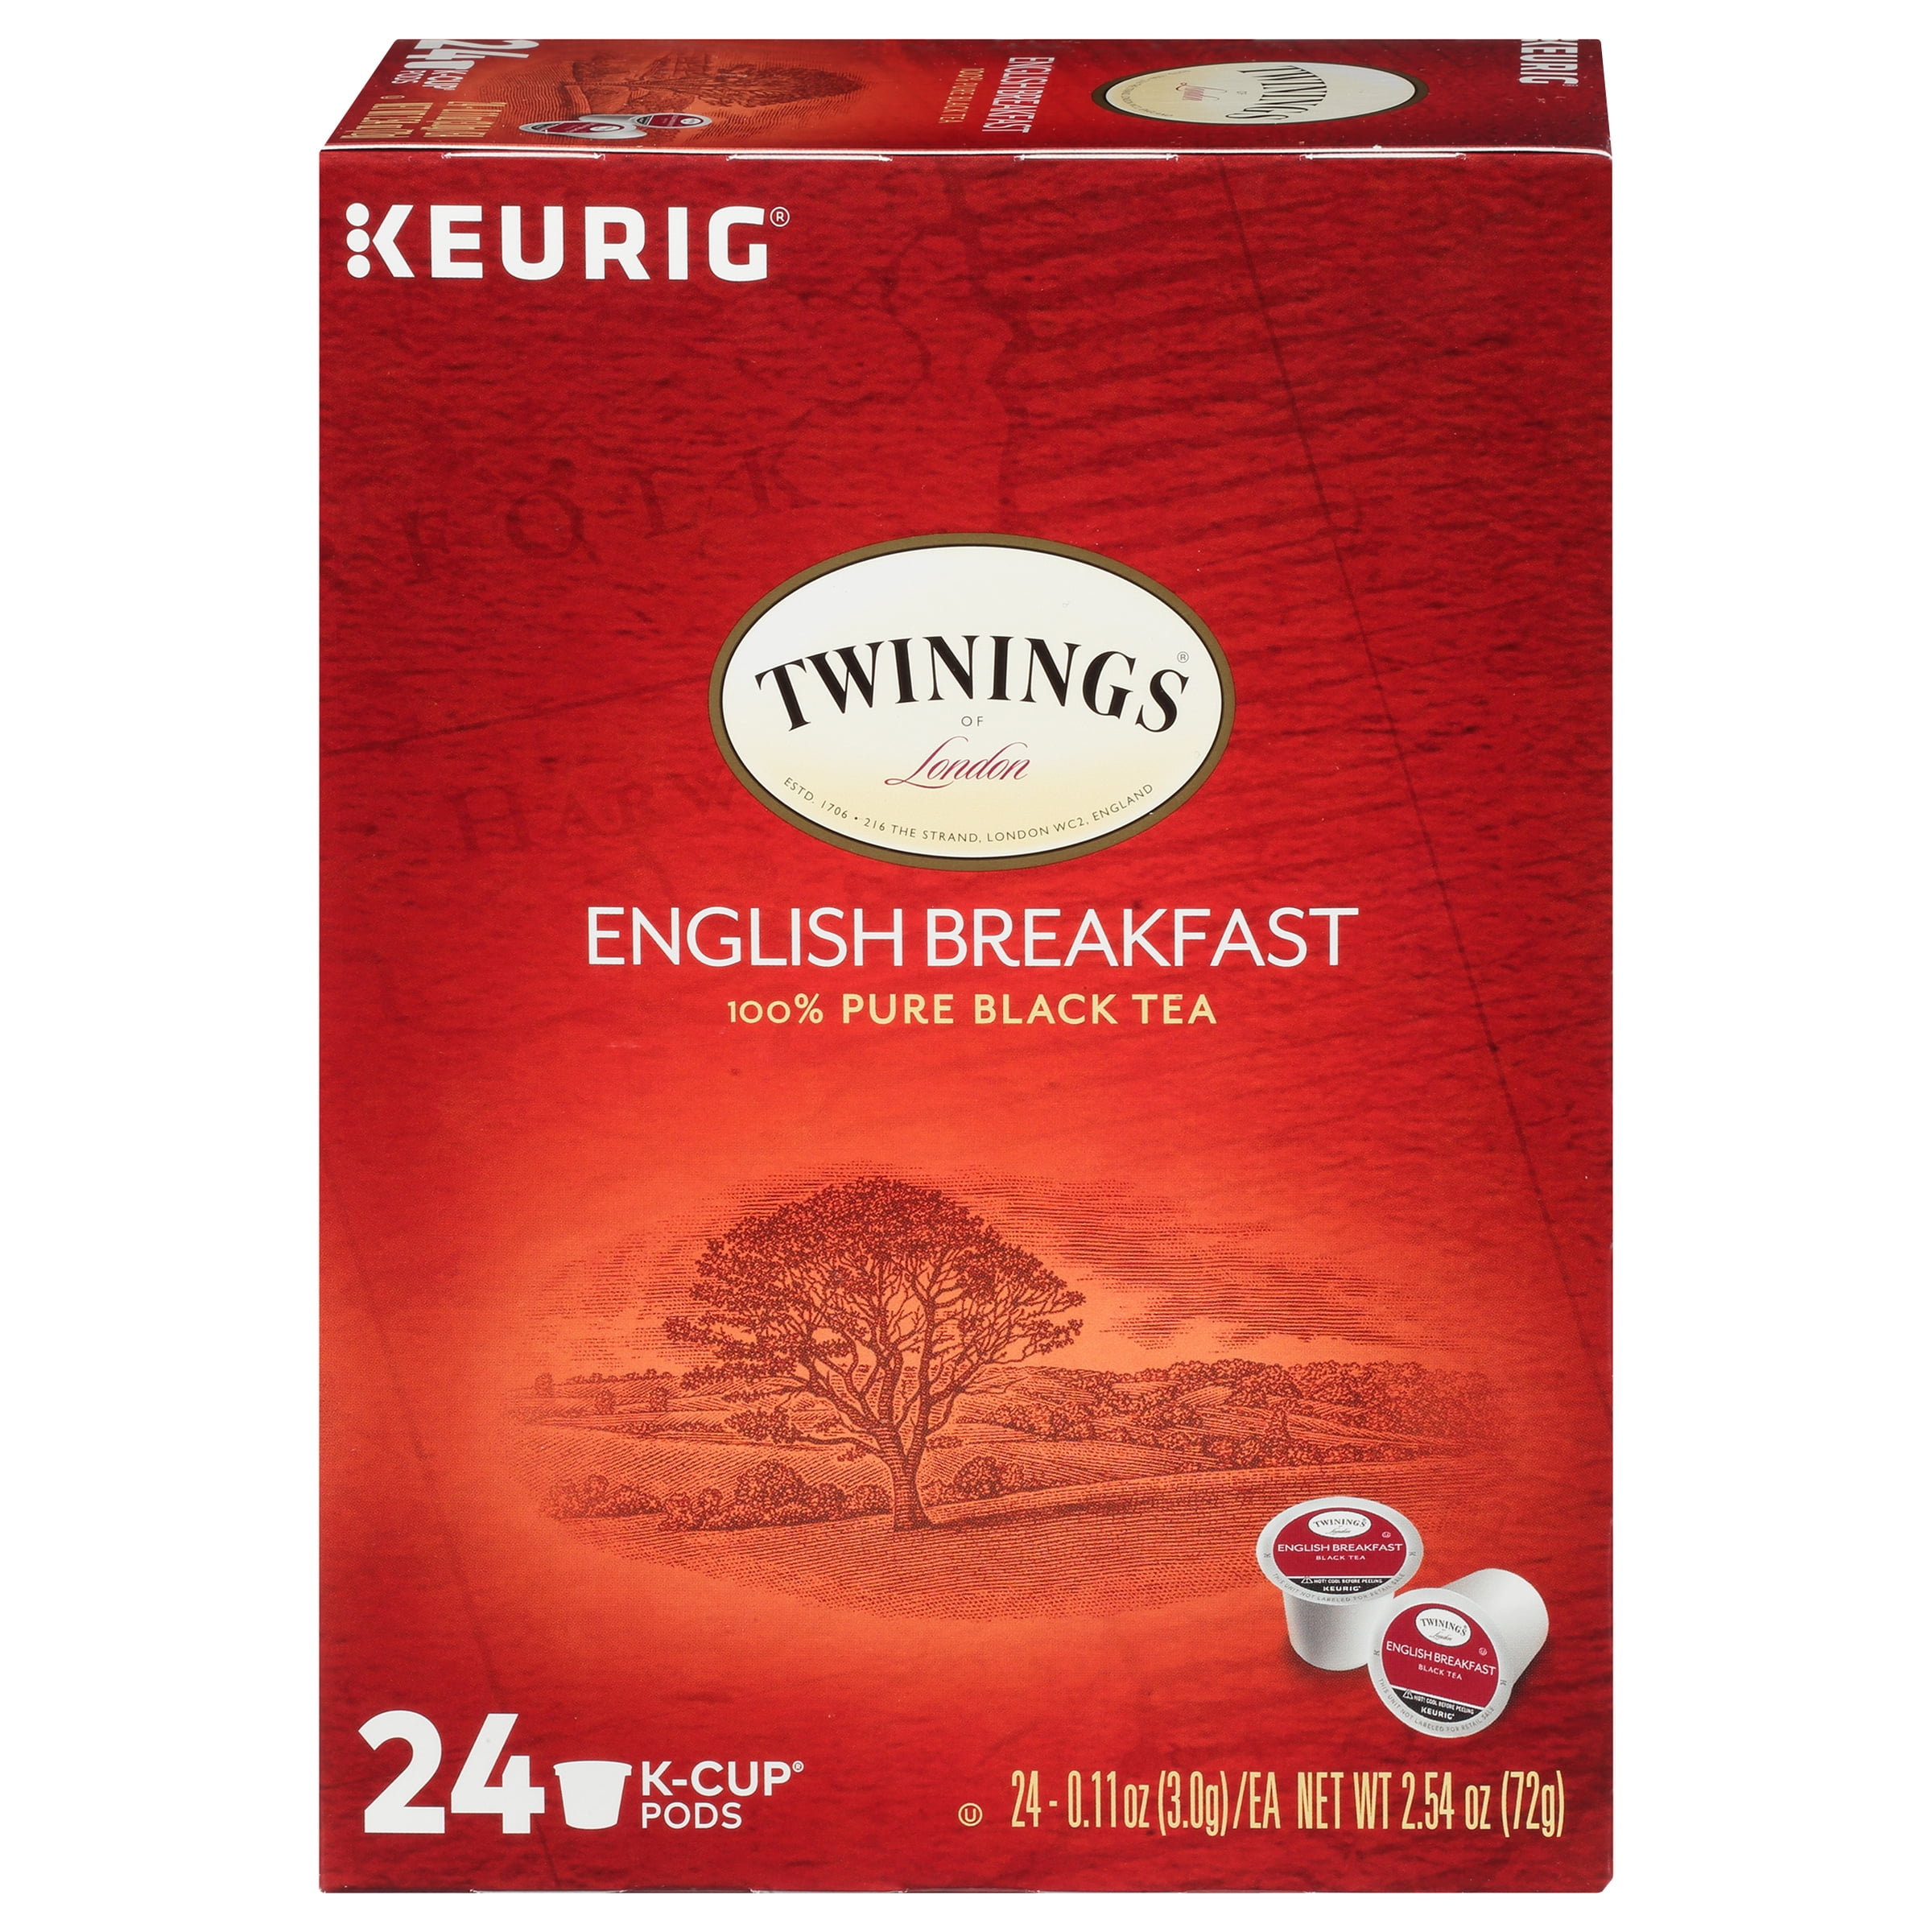 Twinings English Breakfast Tea K-Cup Pods, 24 Count